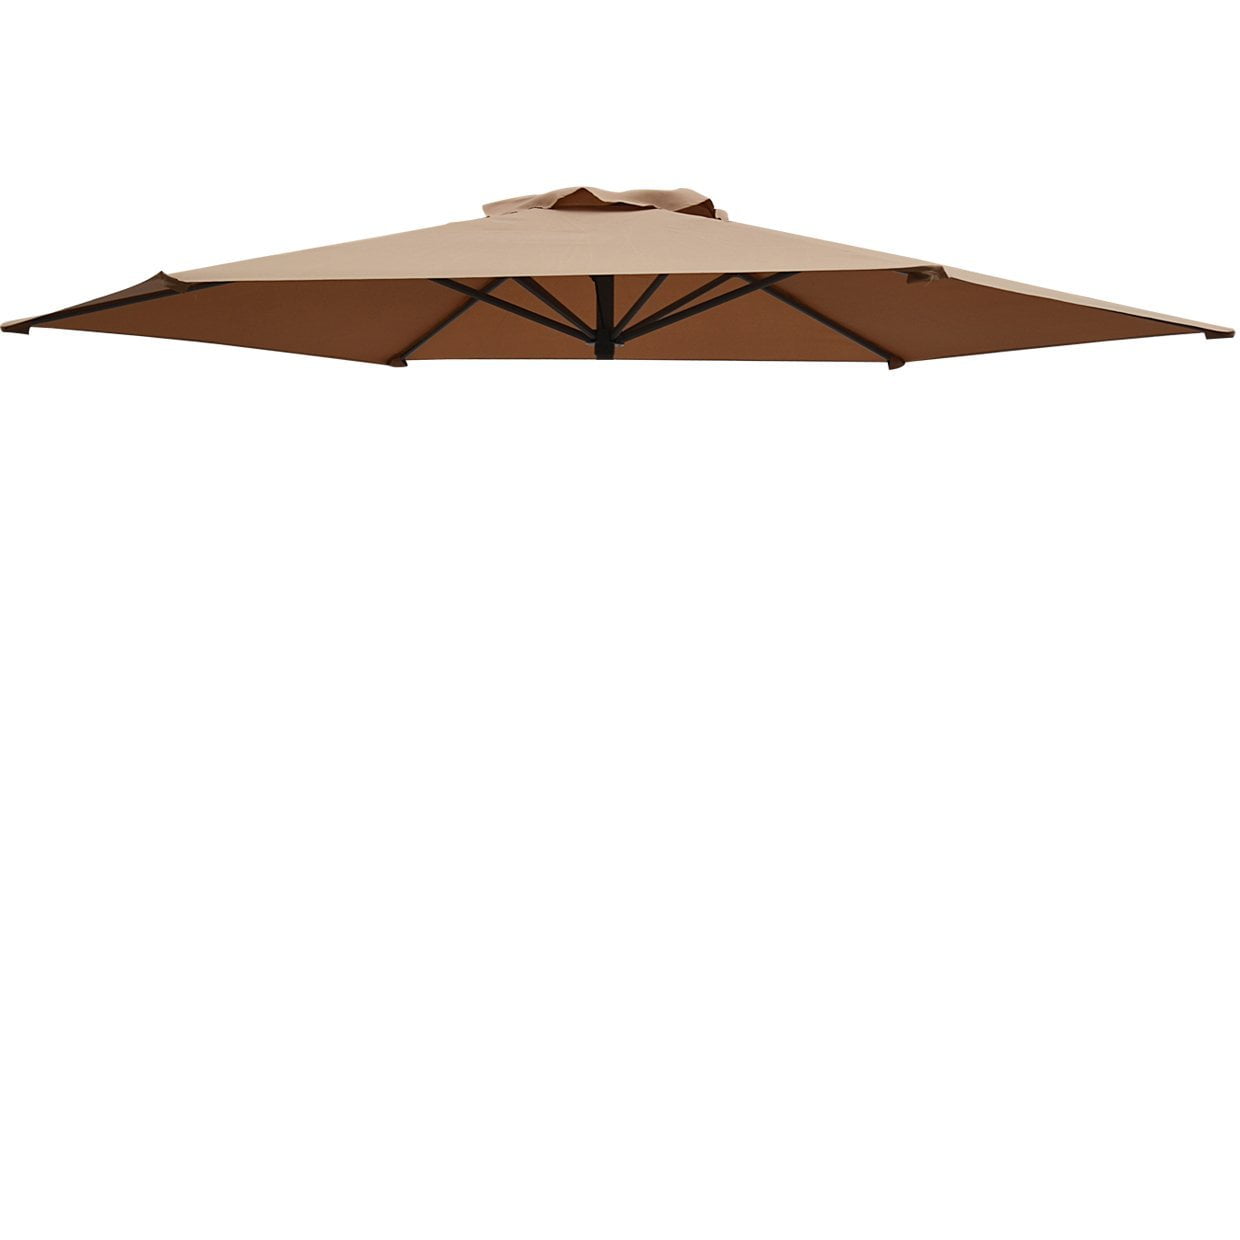 Fngedex Replacement Parasol Cover 300cm 6 Ribs Outdoor Canopy Sun Shade Cover Replacement, Not full parasol and just the cover